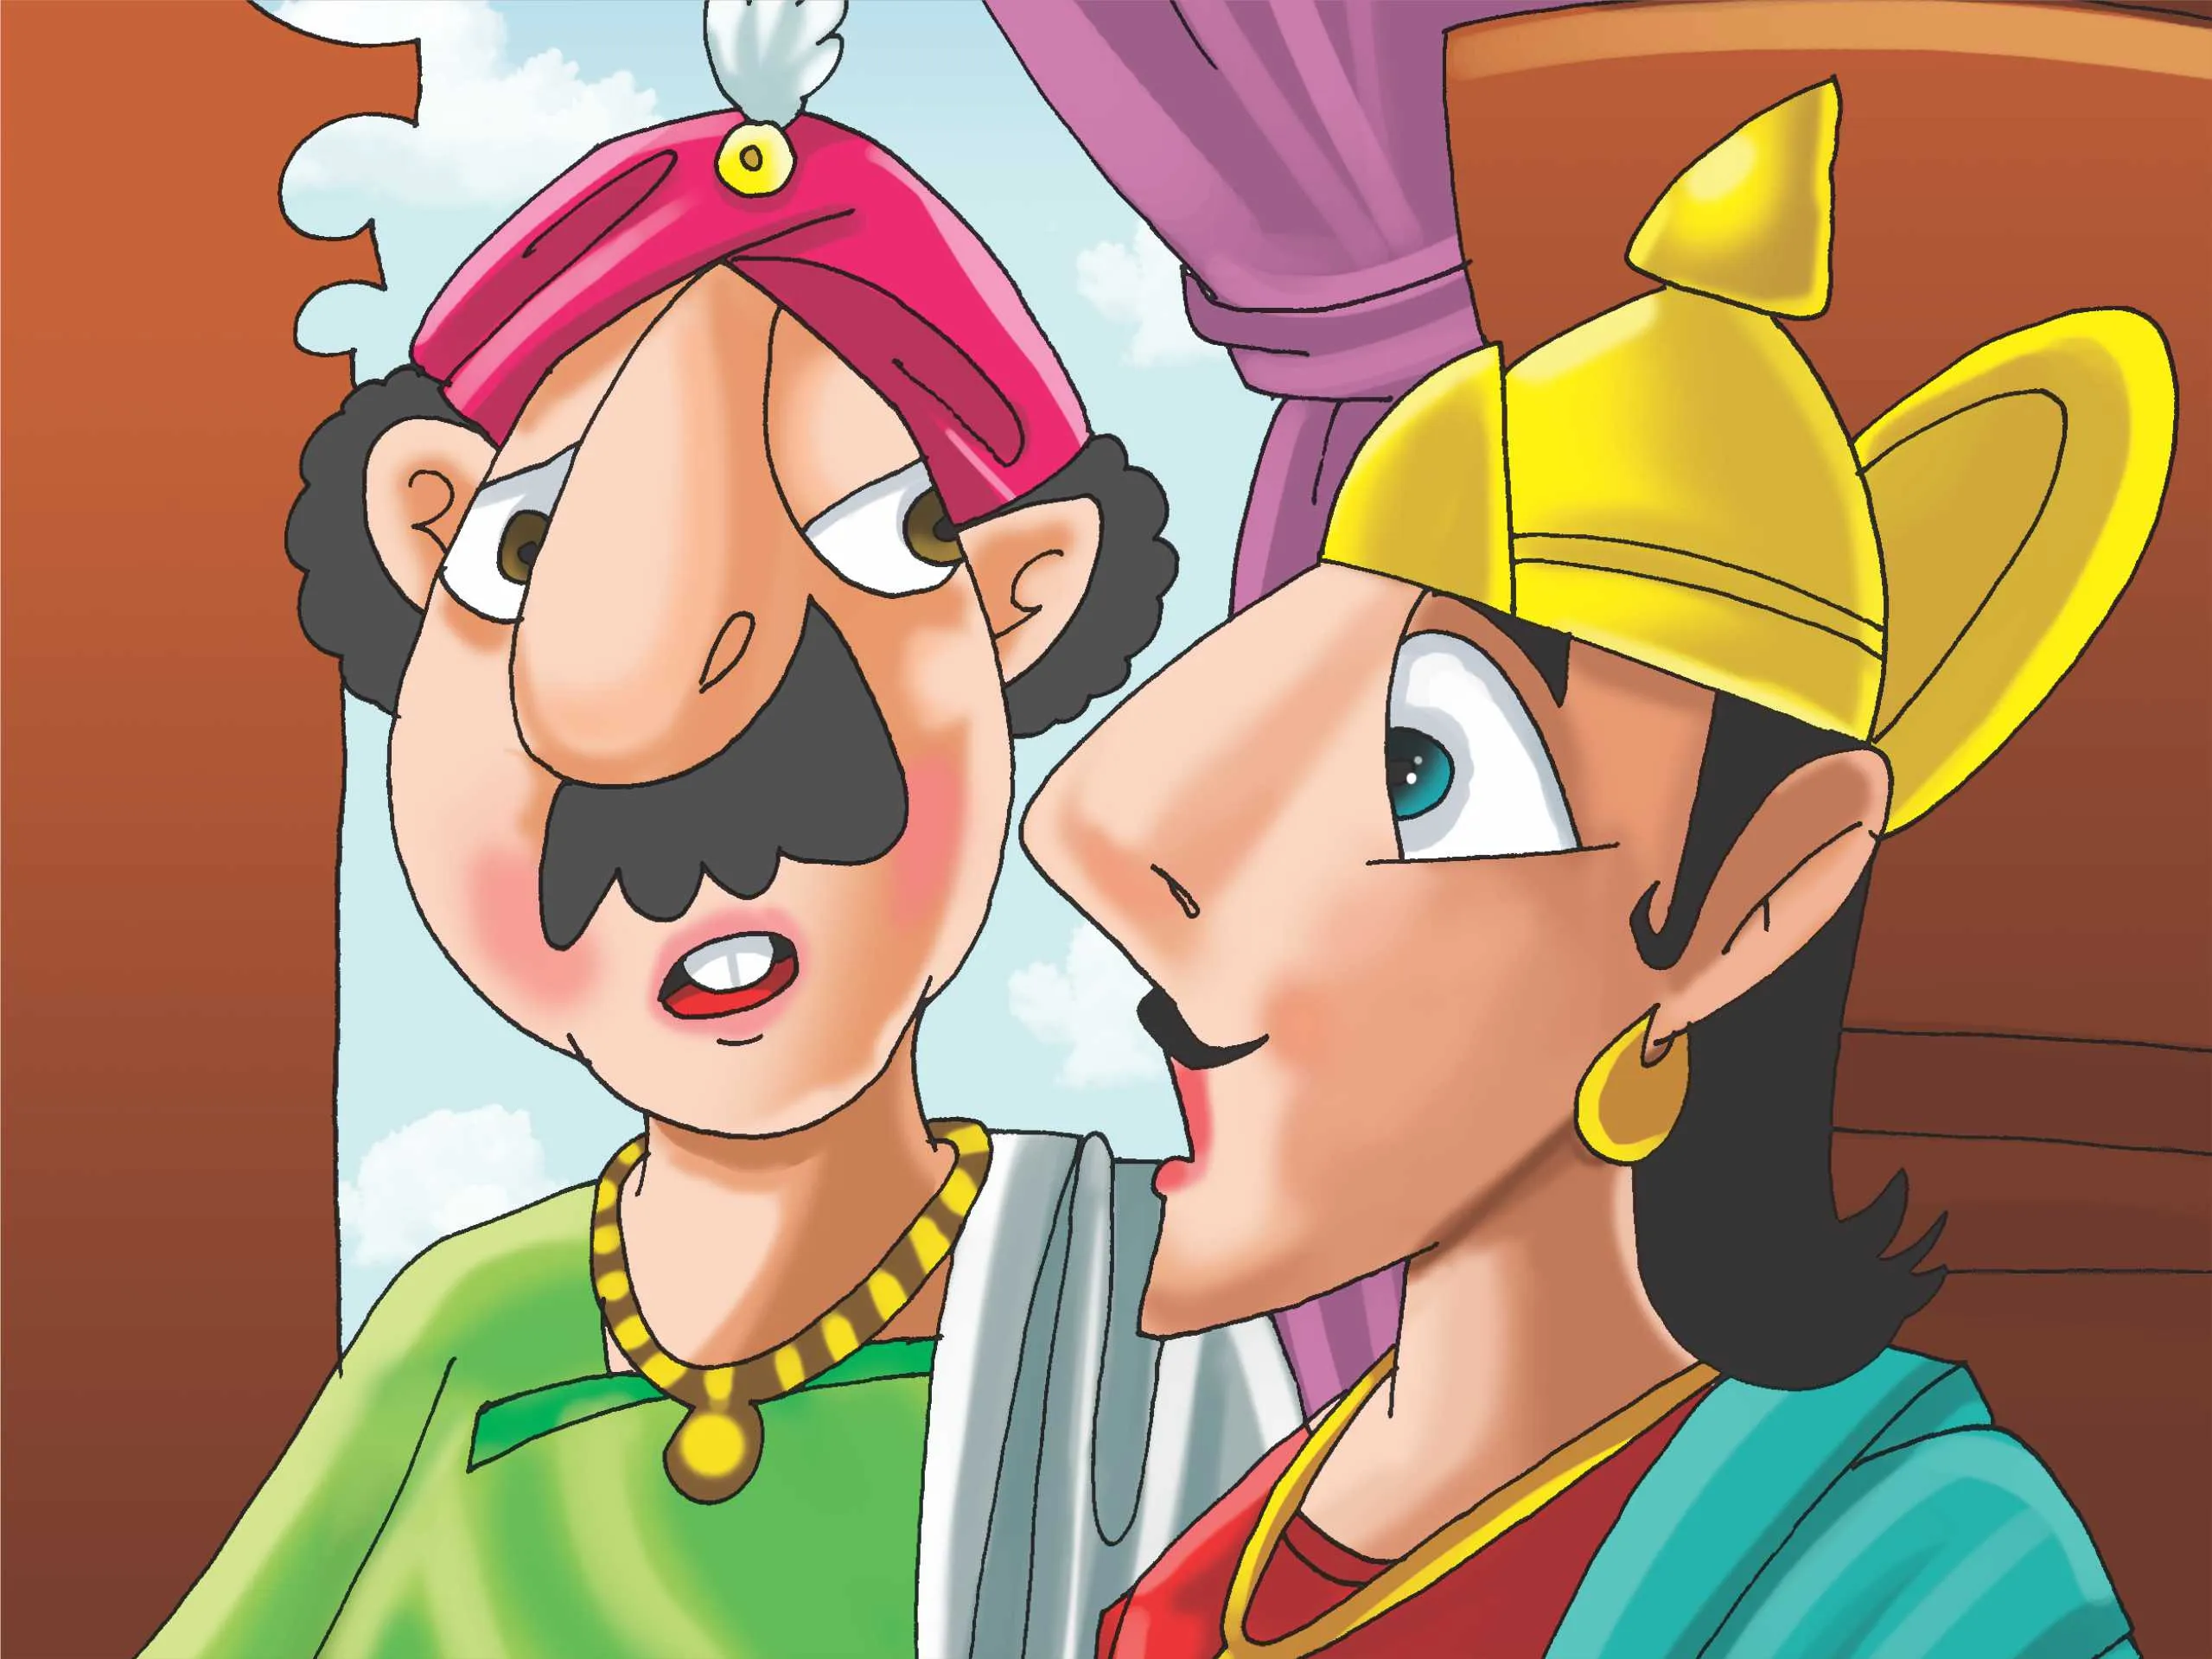 King with Finance Minister cartoon image